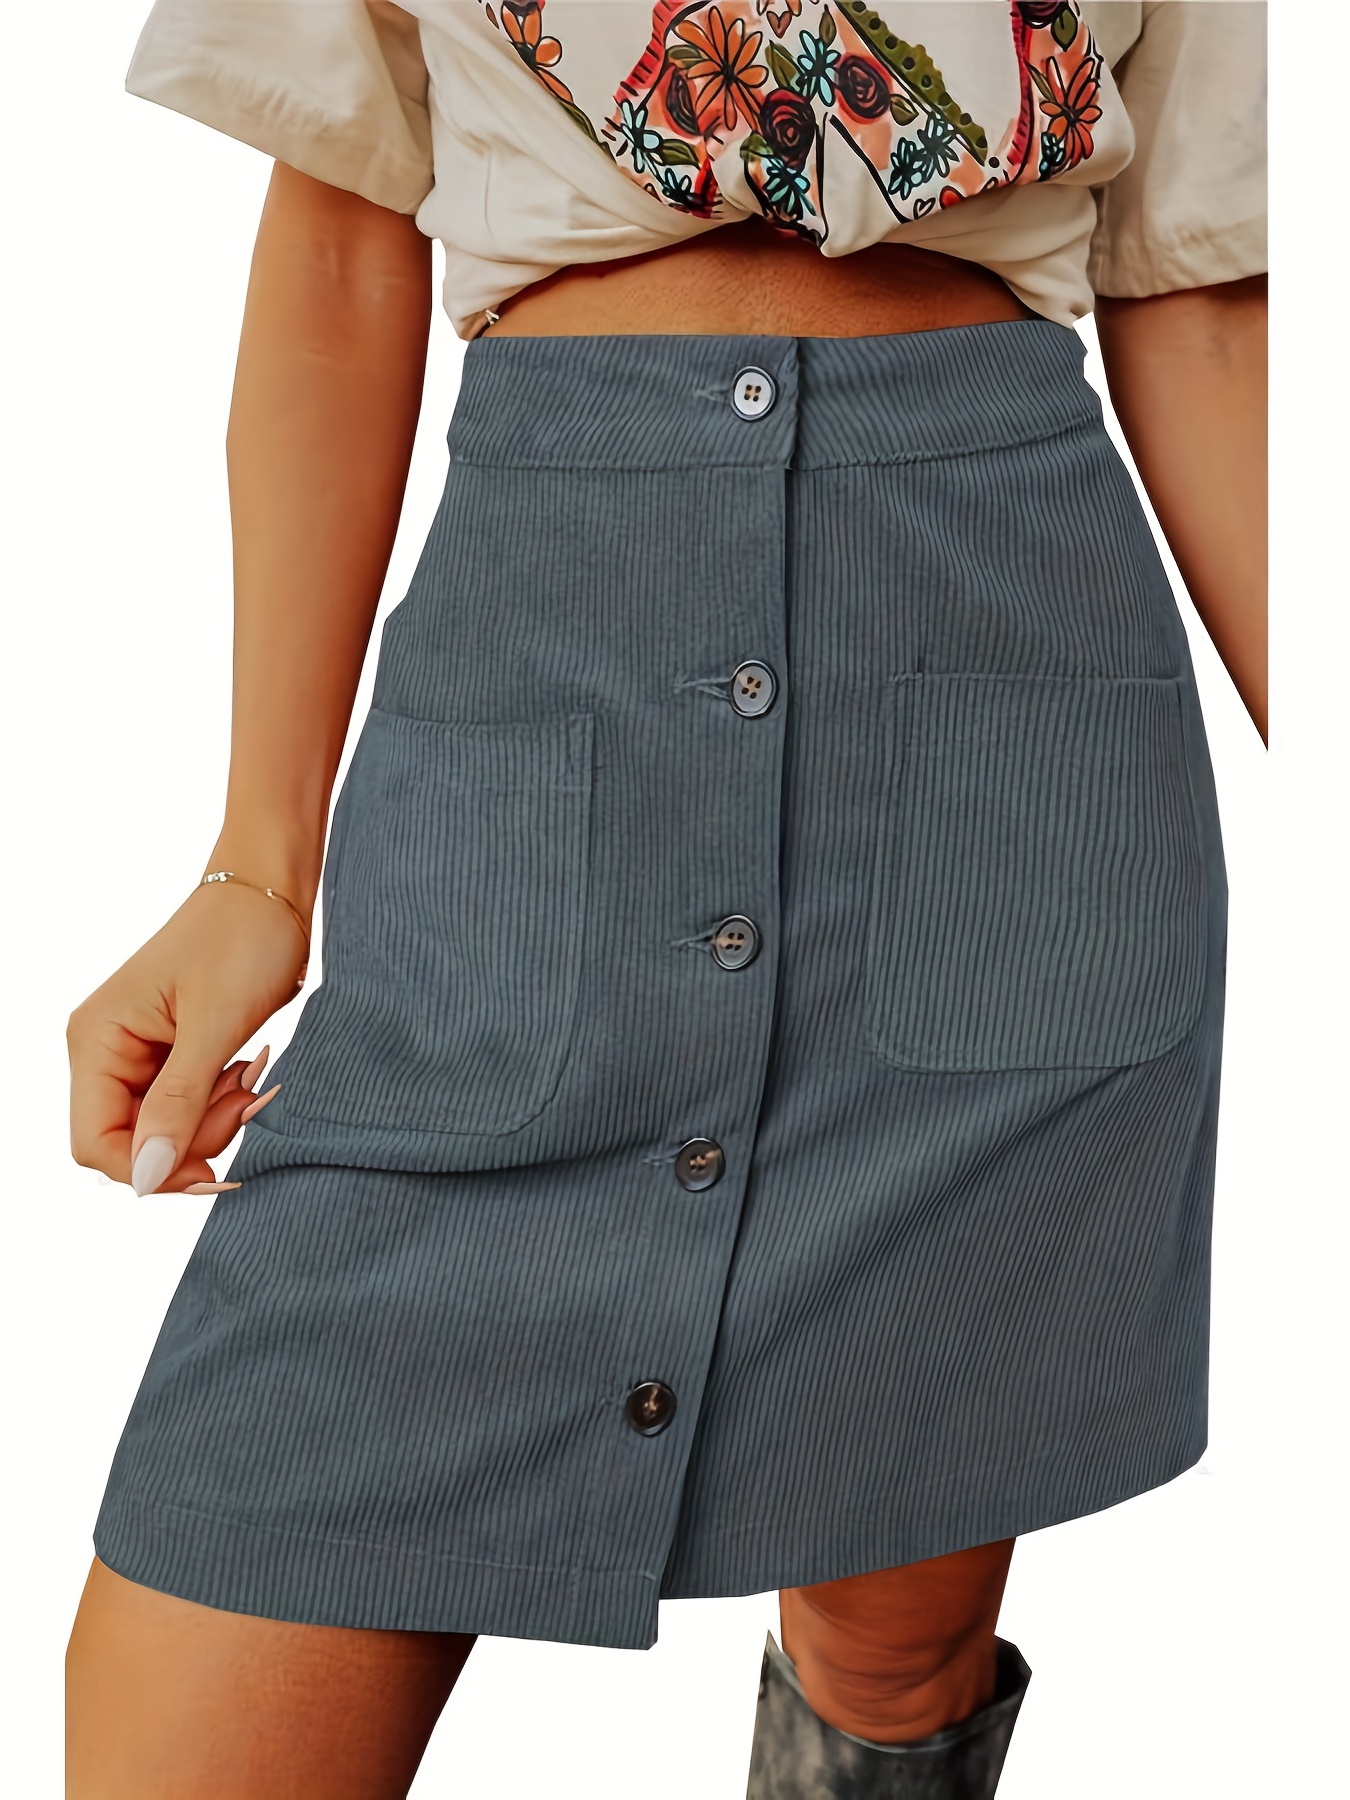 Solid Button Front Corduroy Skirt, Vintage High Waist Flared Mini Skirt,  Women's Clothing